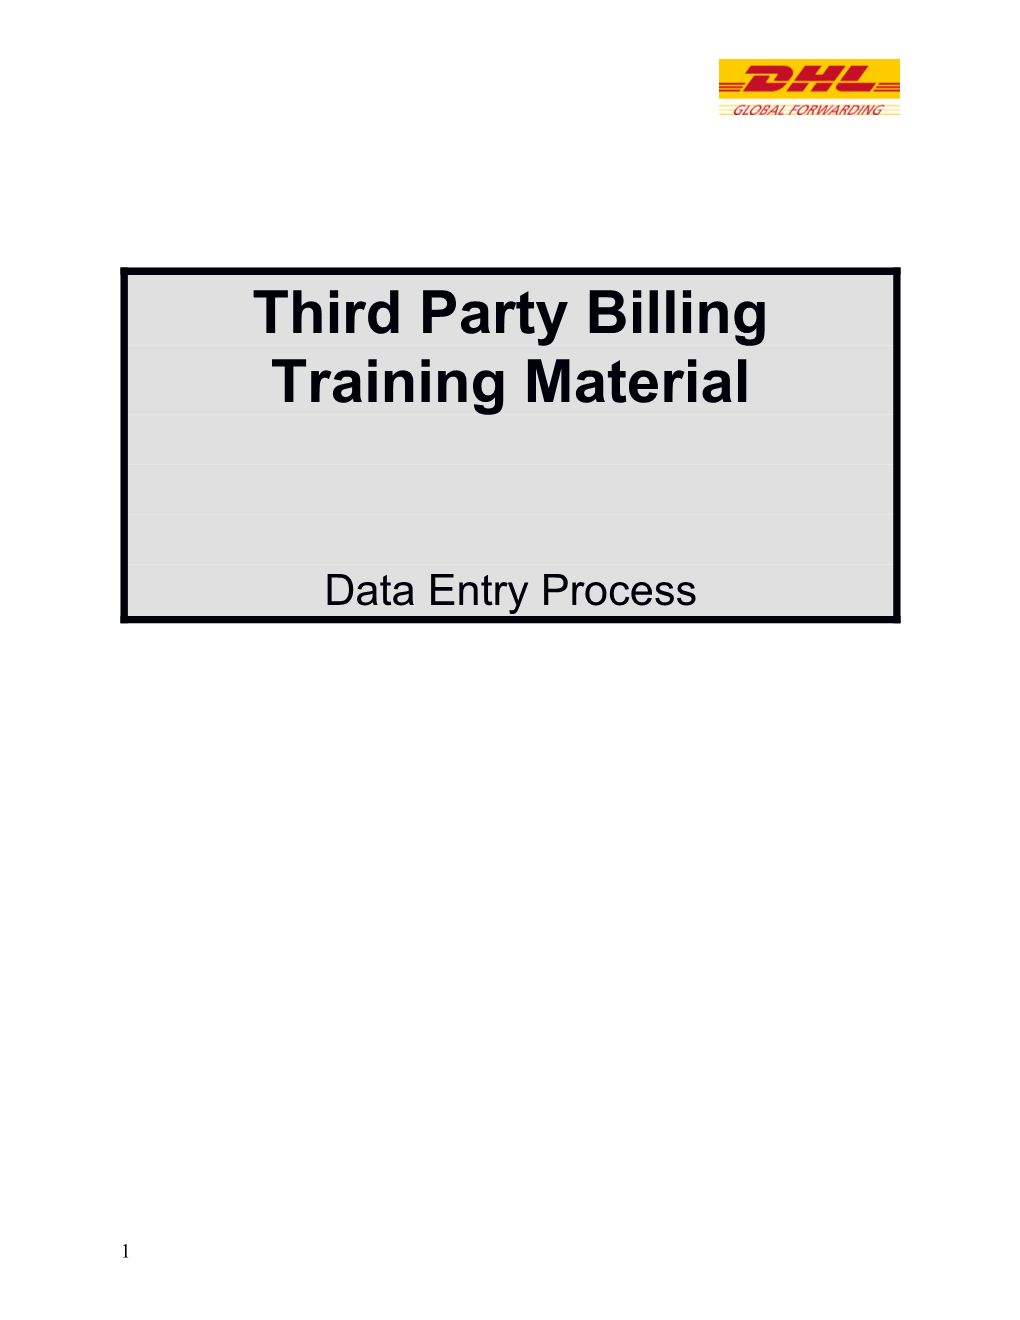 Third Party Billing